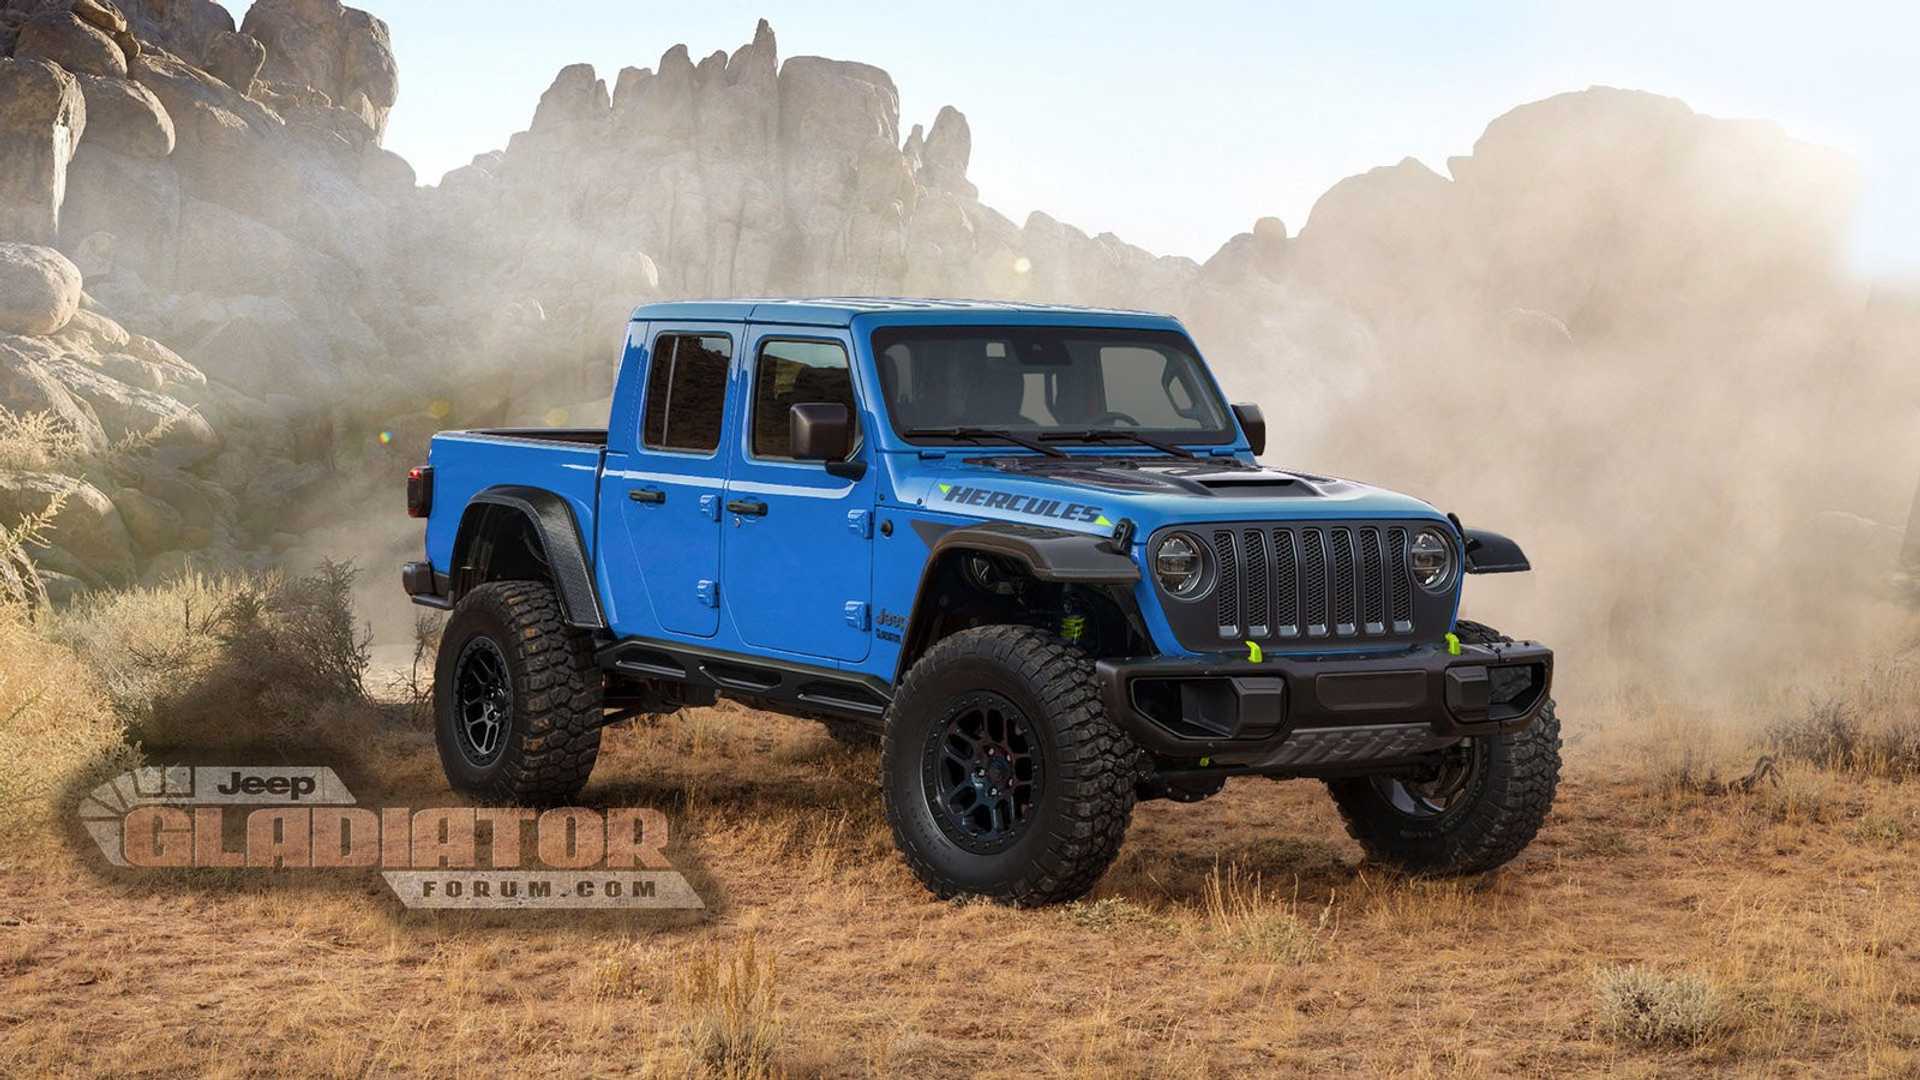 Jeep Gladiator Hercules Performance Version In The Works?